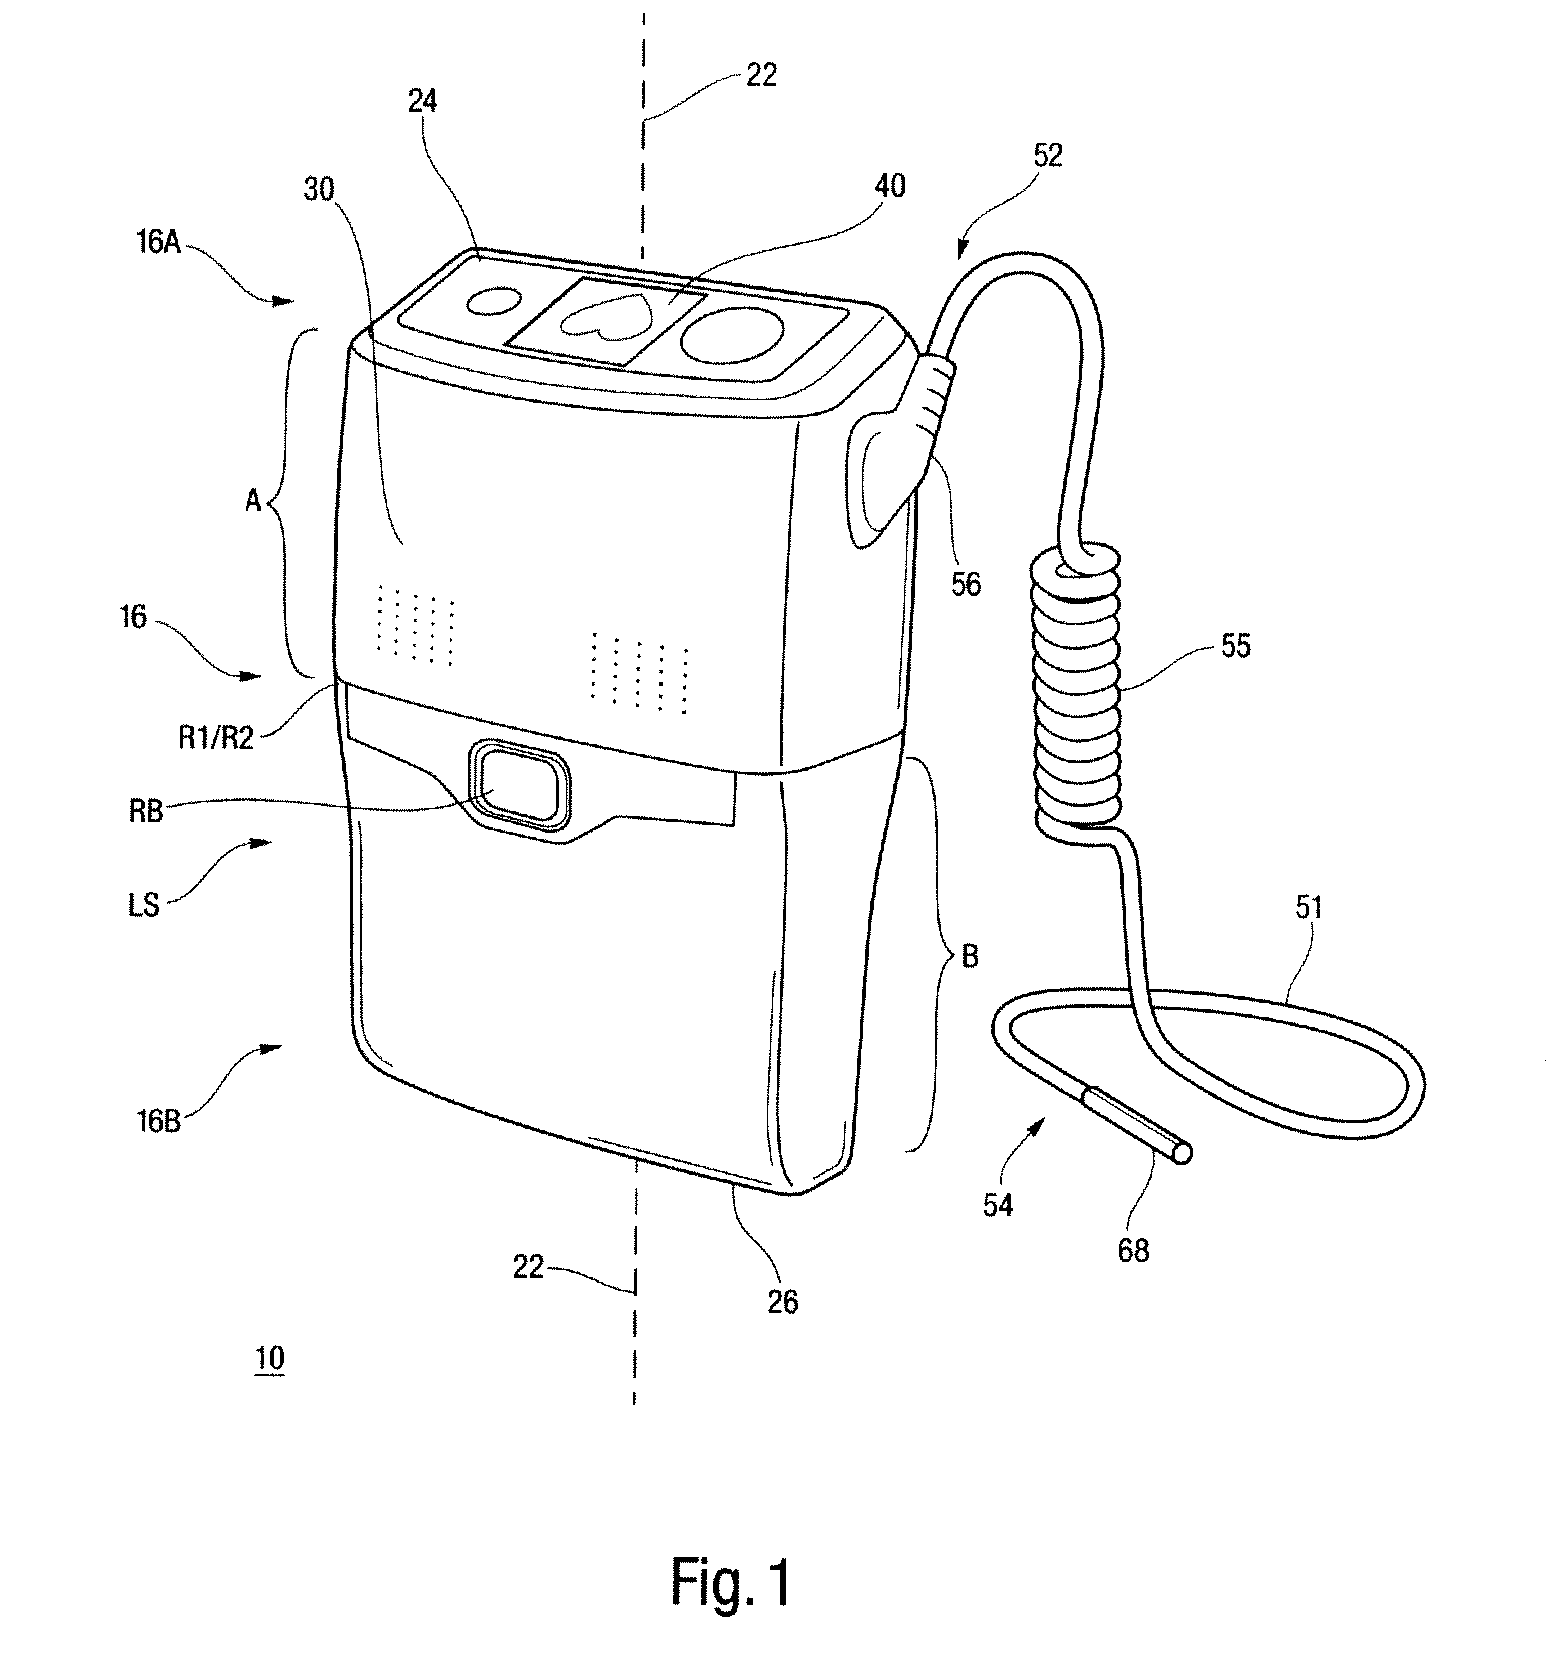 Controller and power source for implantable blood pump